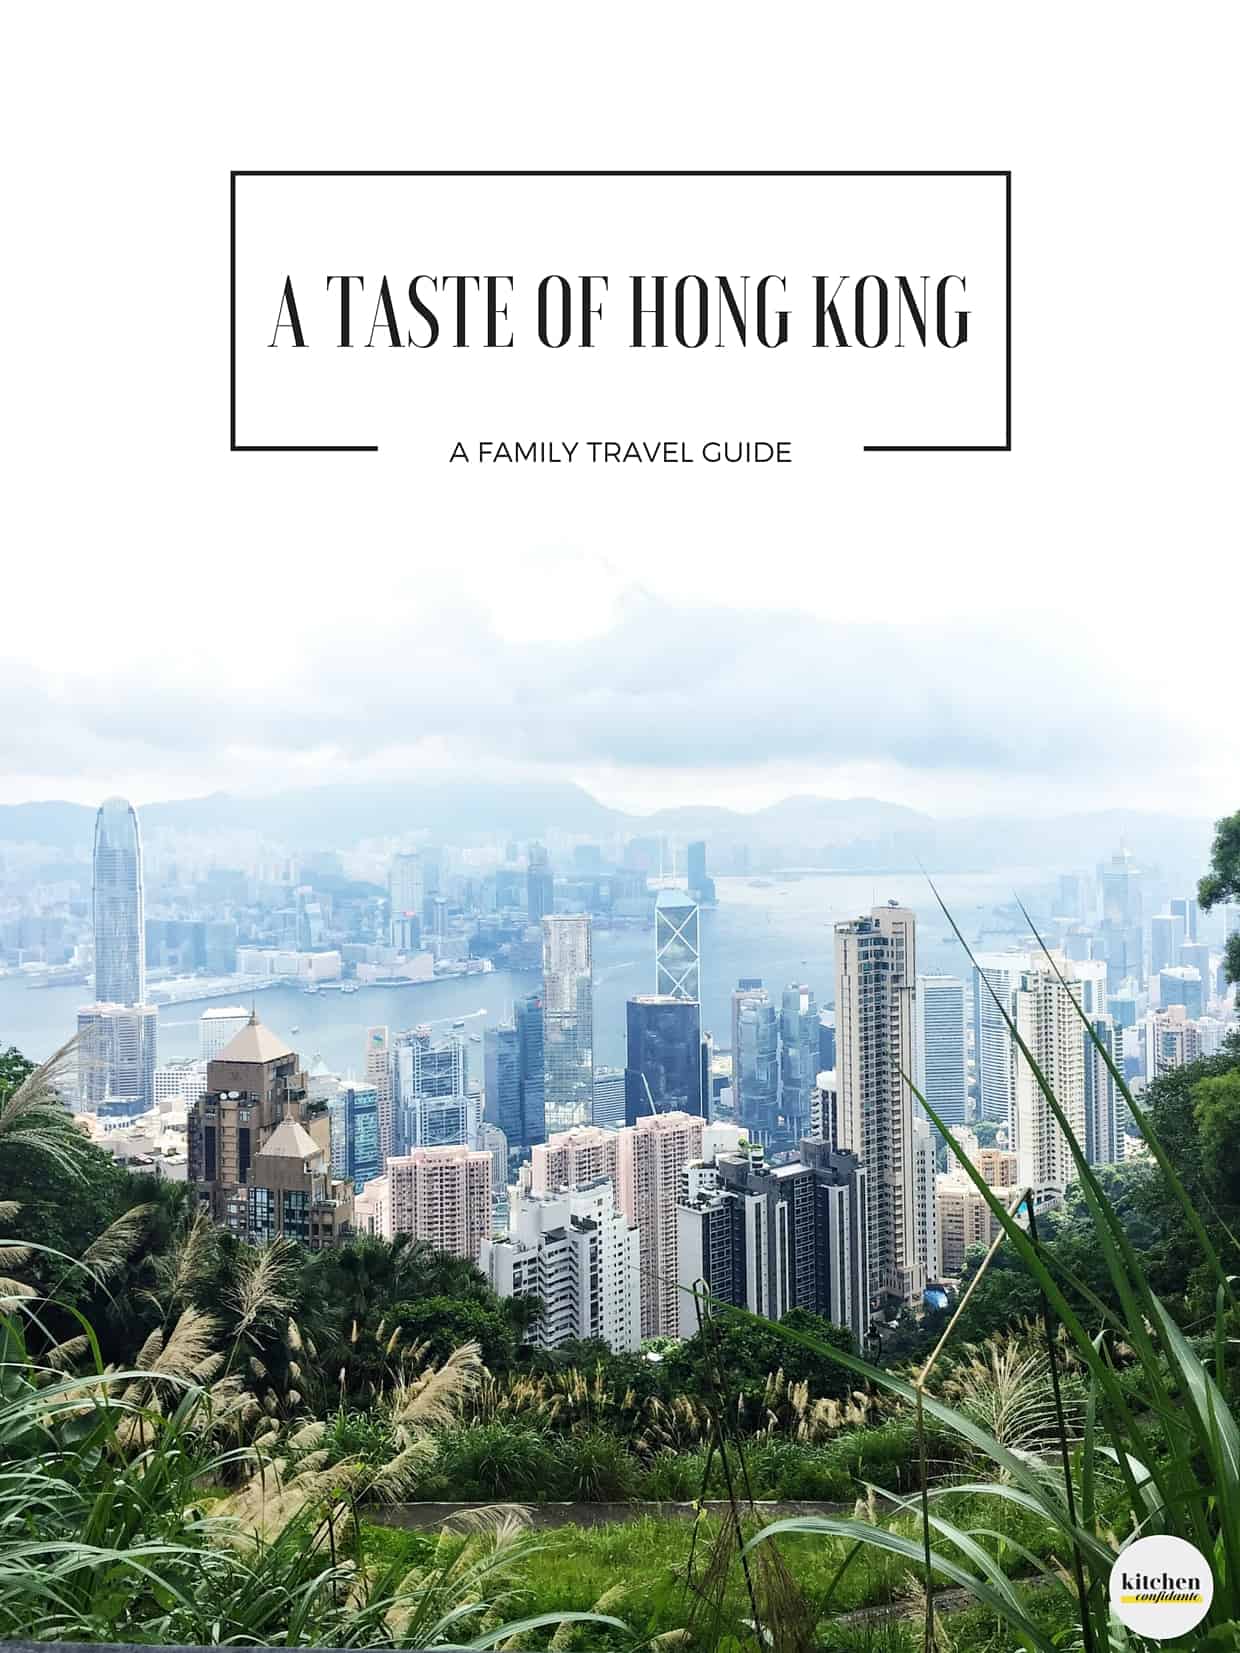 A Taste of Hong Kong- A Family Travel Guide // Planning a trip to Hong Kong? Come join me for our family’s pick on places to savor, stay and play in Asia’s World City!